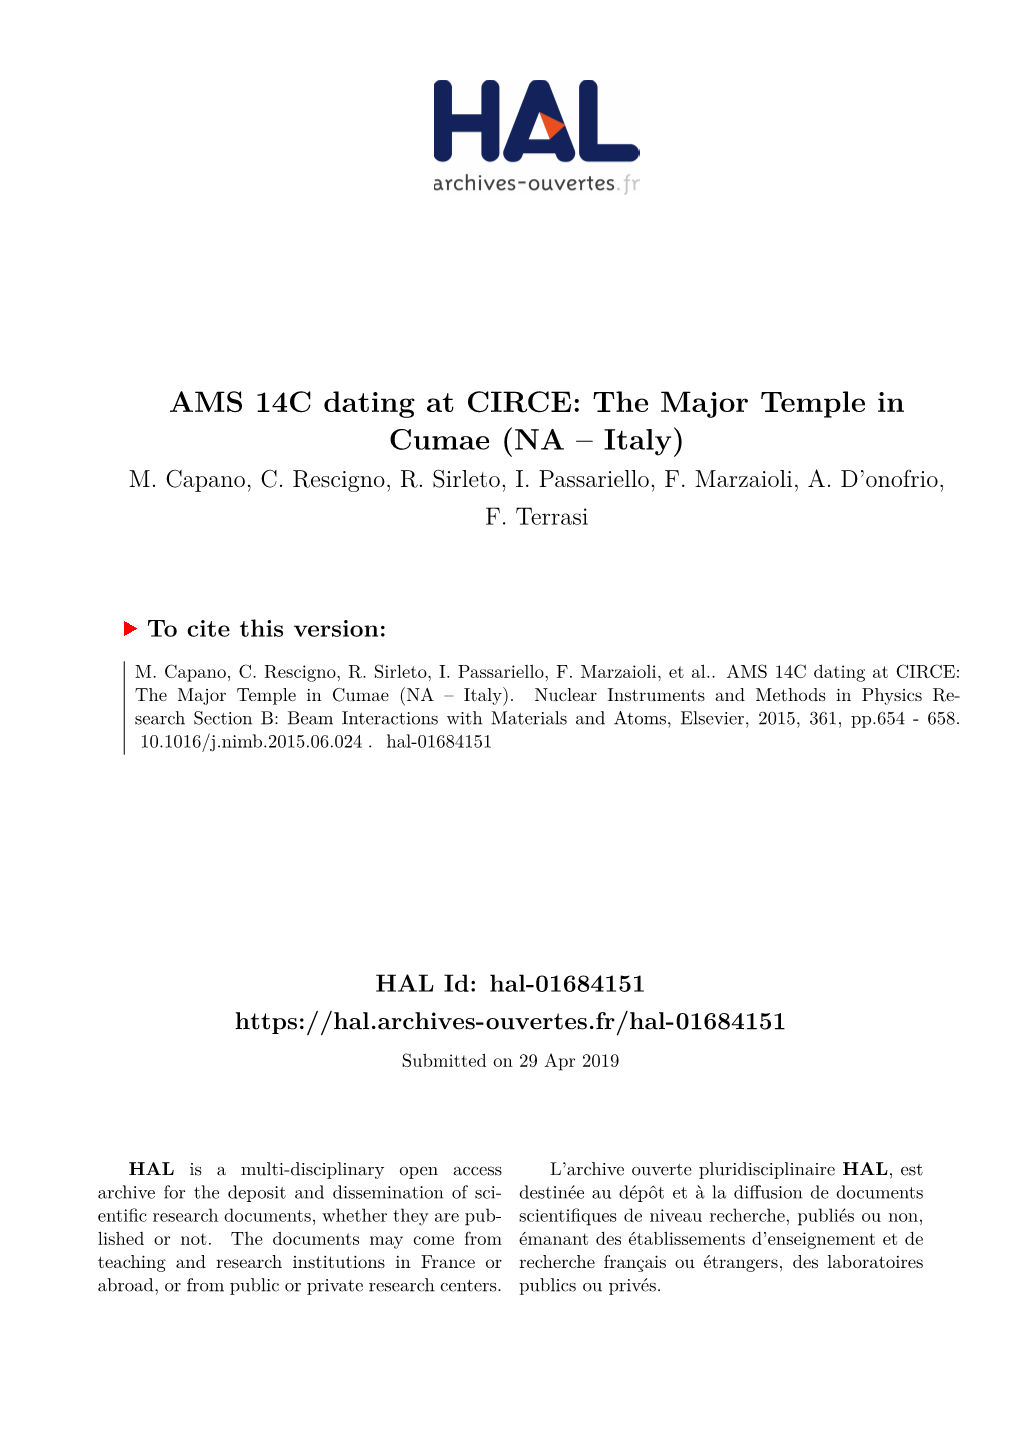 AMS 14C Dating at CIRCE: the Major Temple in Cumae (NA – Italy) M